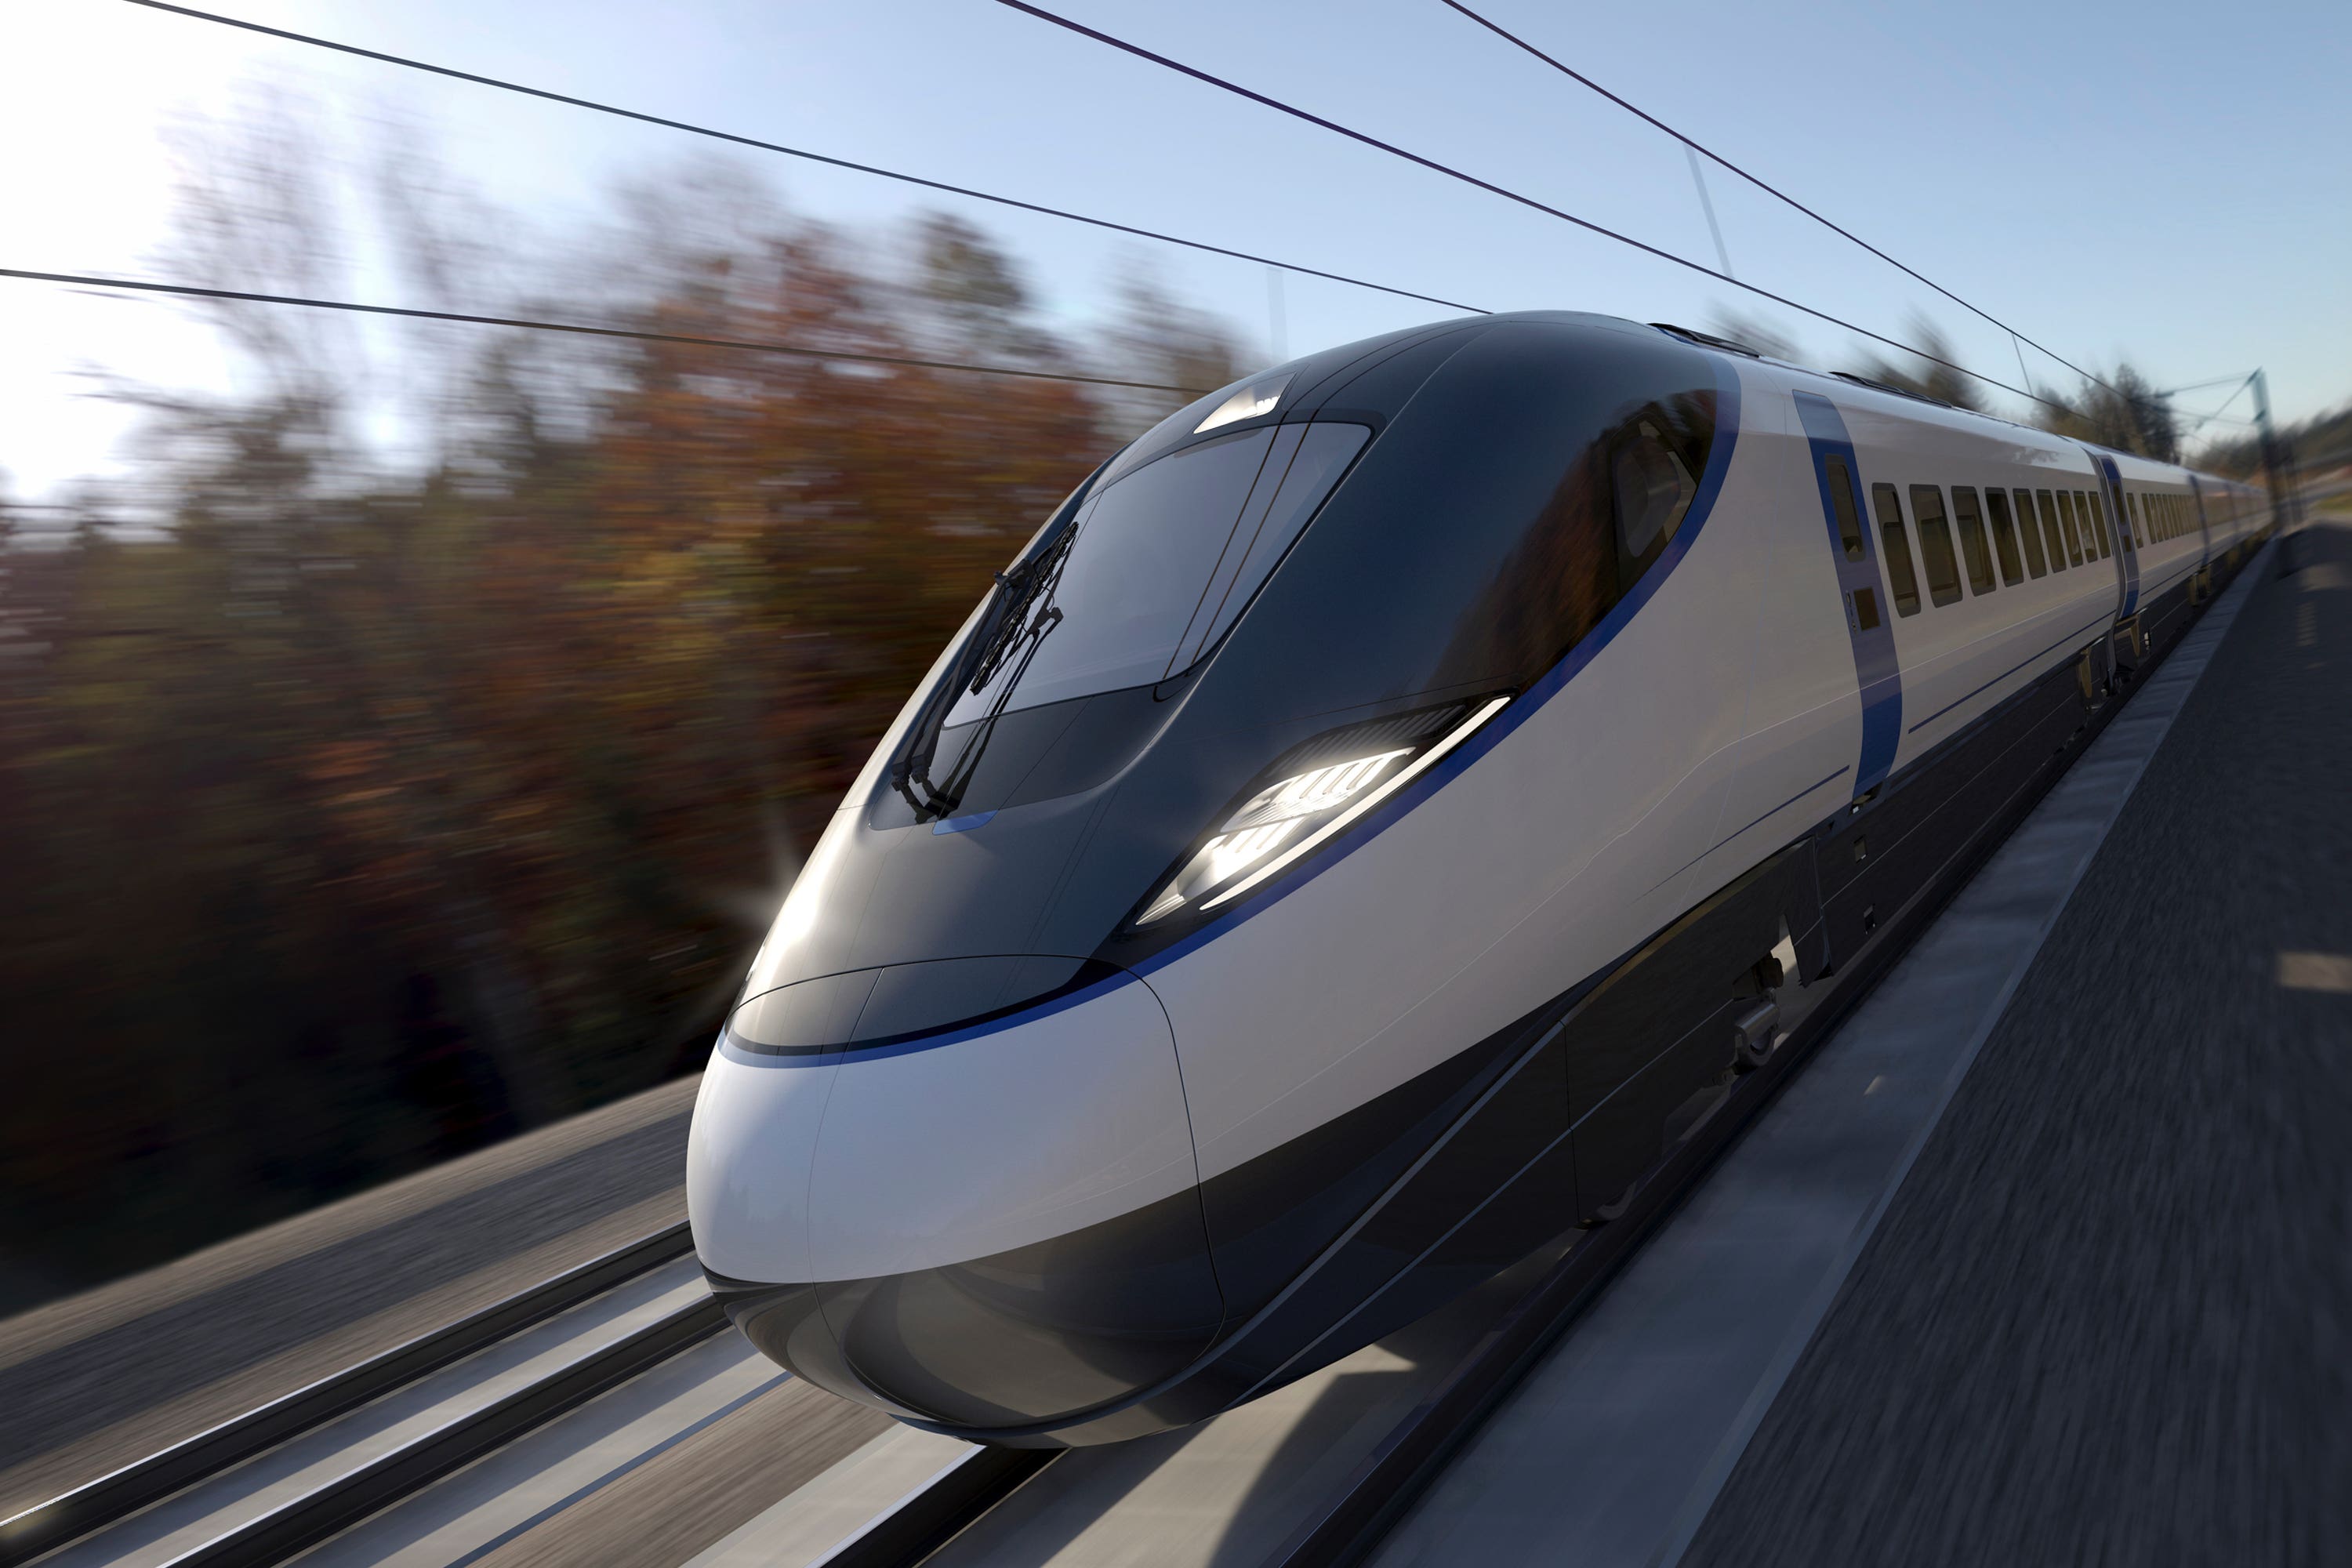 The Government refused to confirm HS2 will reach its central London terminus at Euston amid reports the it may be delayed because of rising costs (HS2/PA)